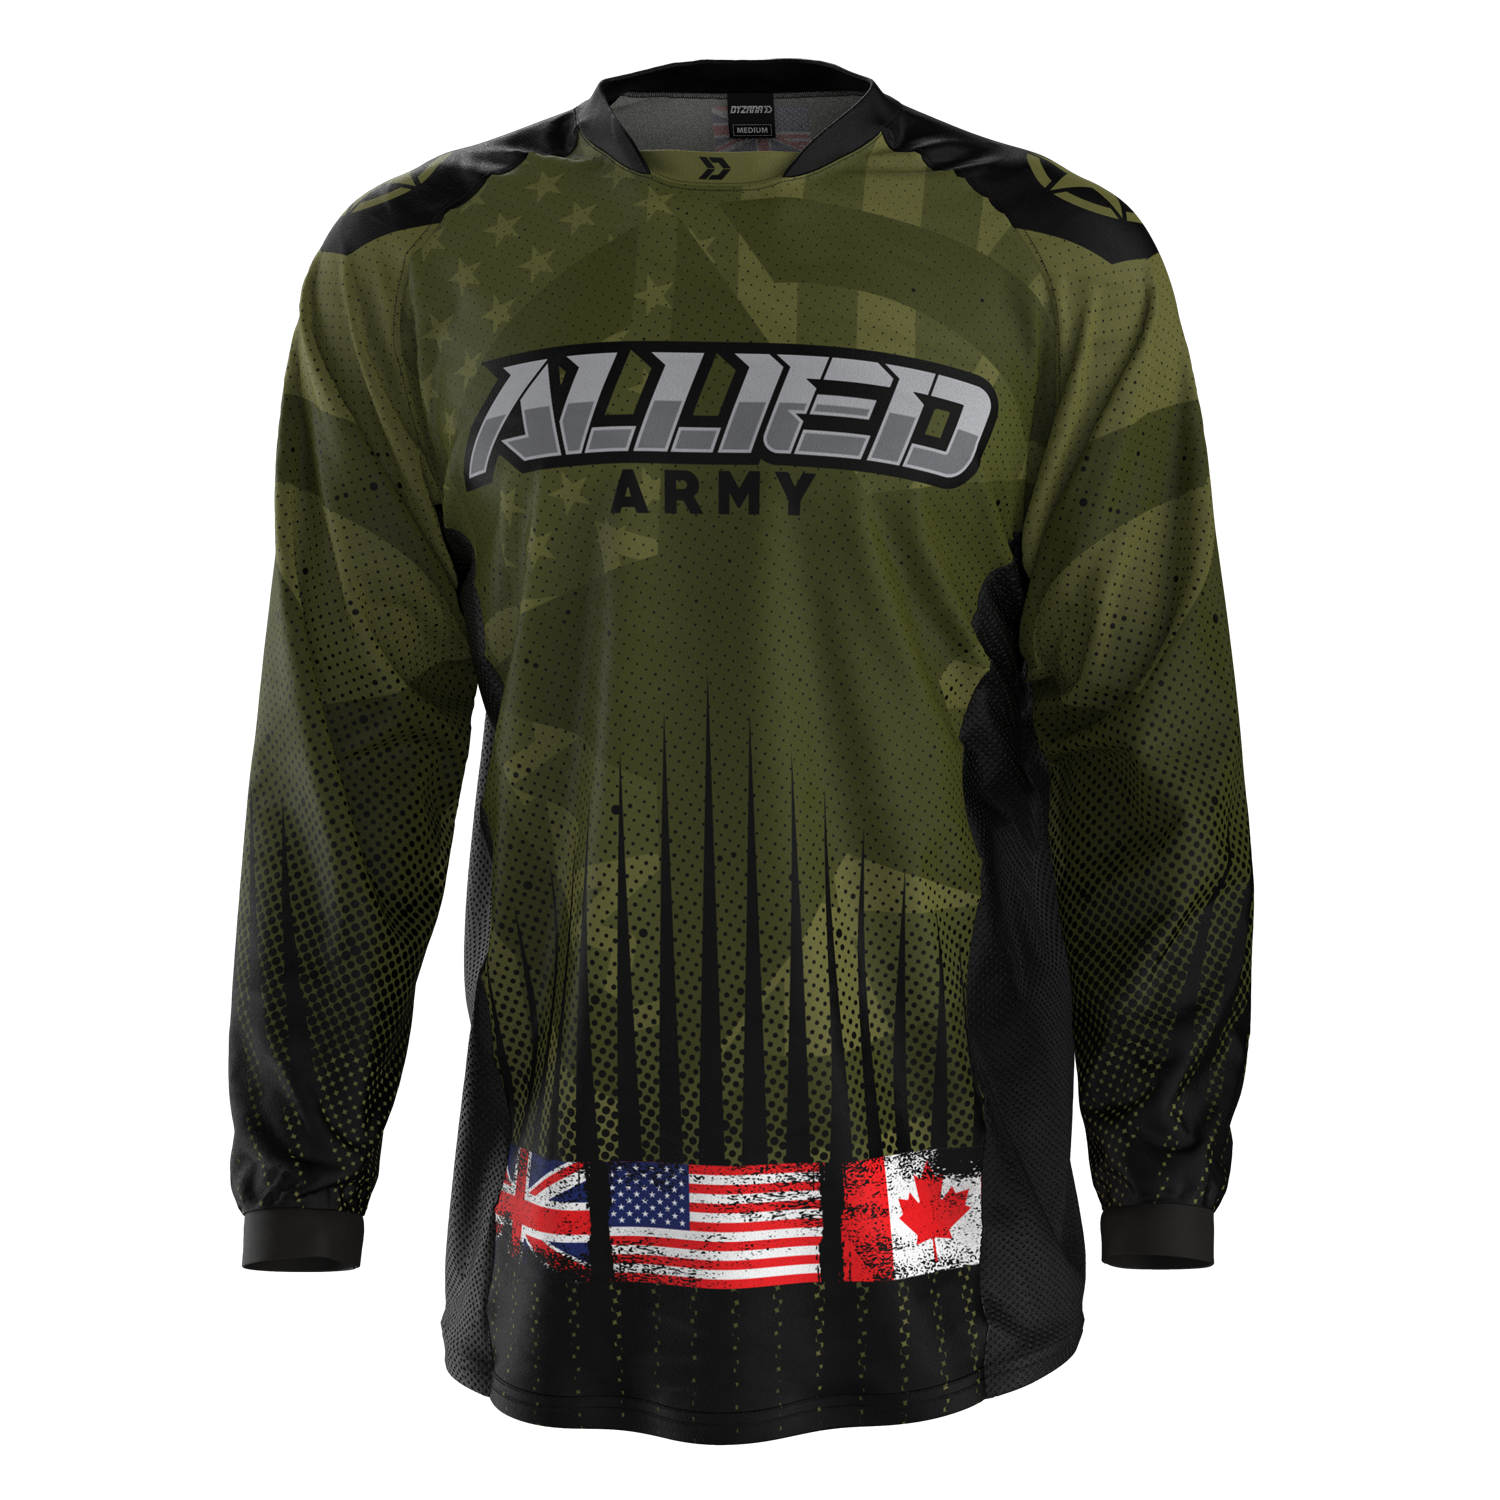 Allied Army - Grind Core Jersey